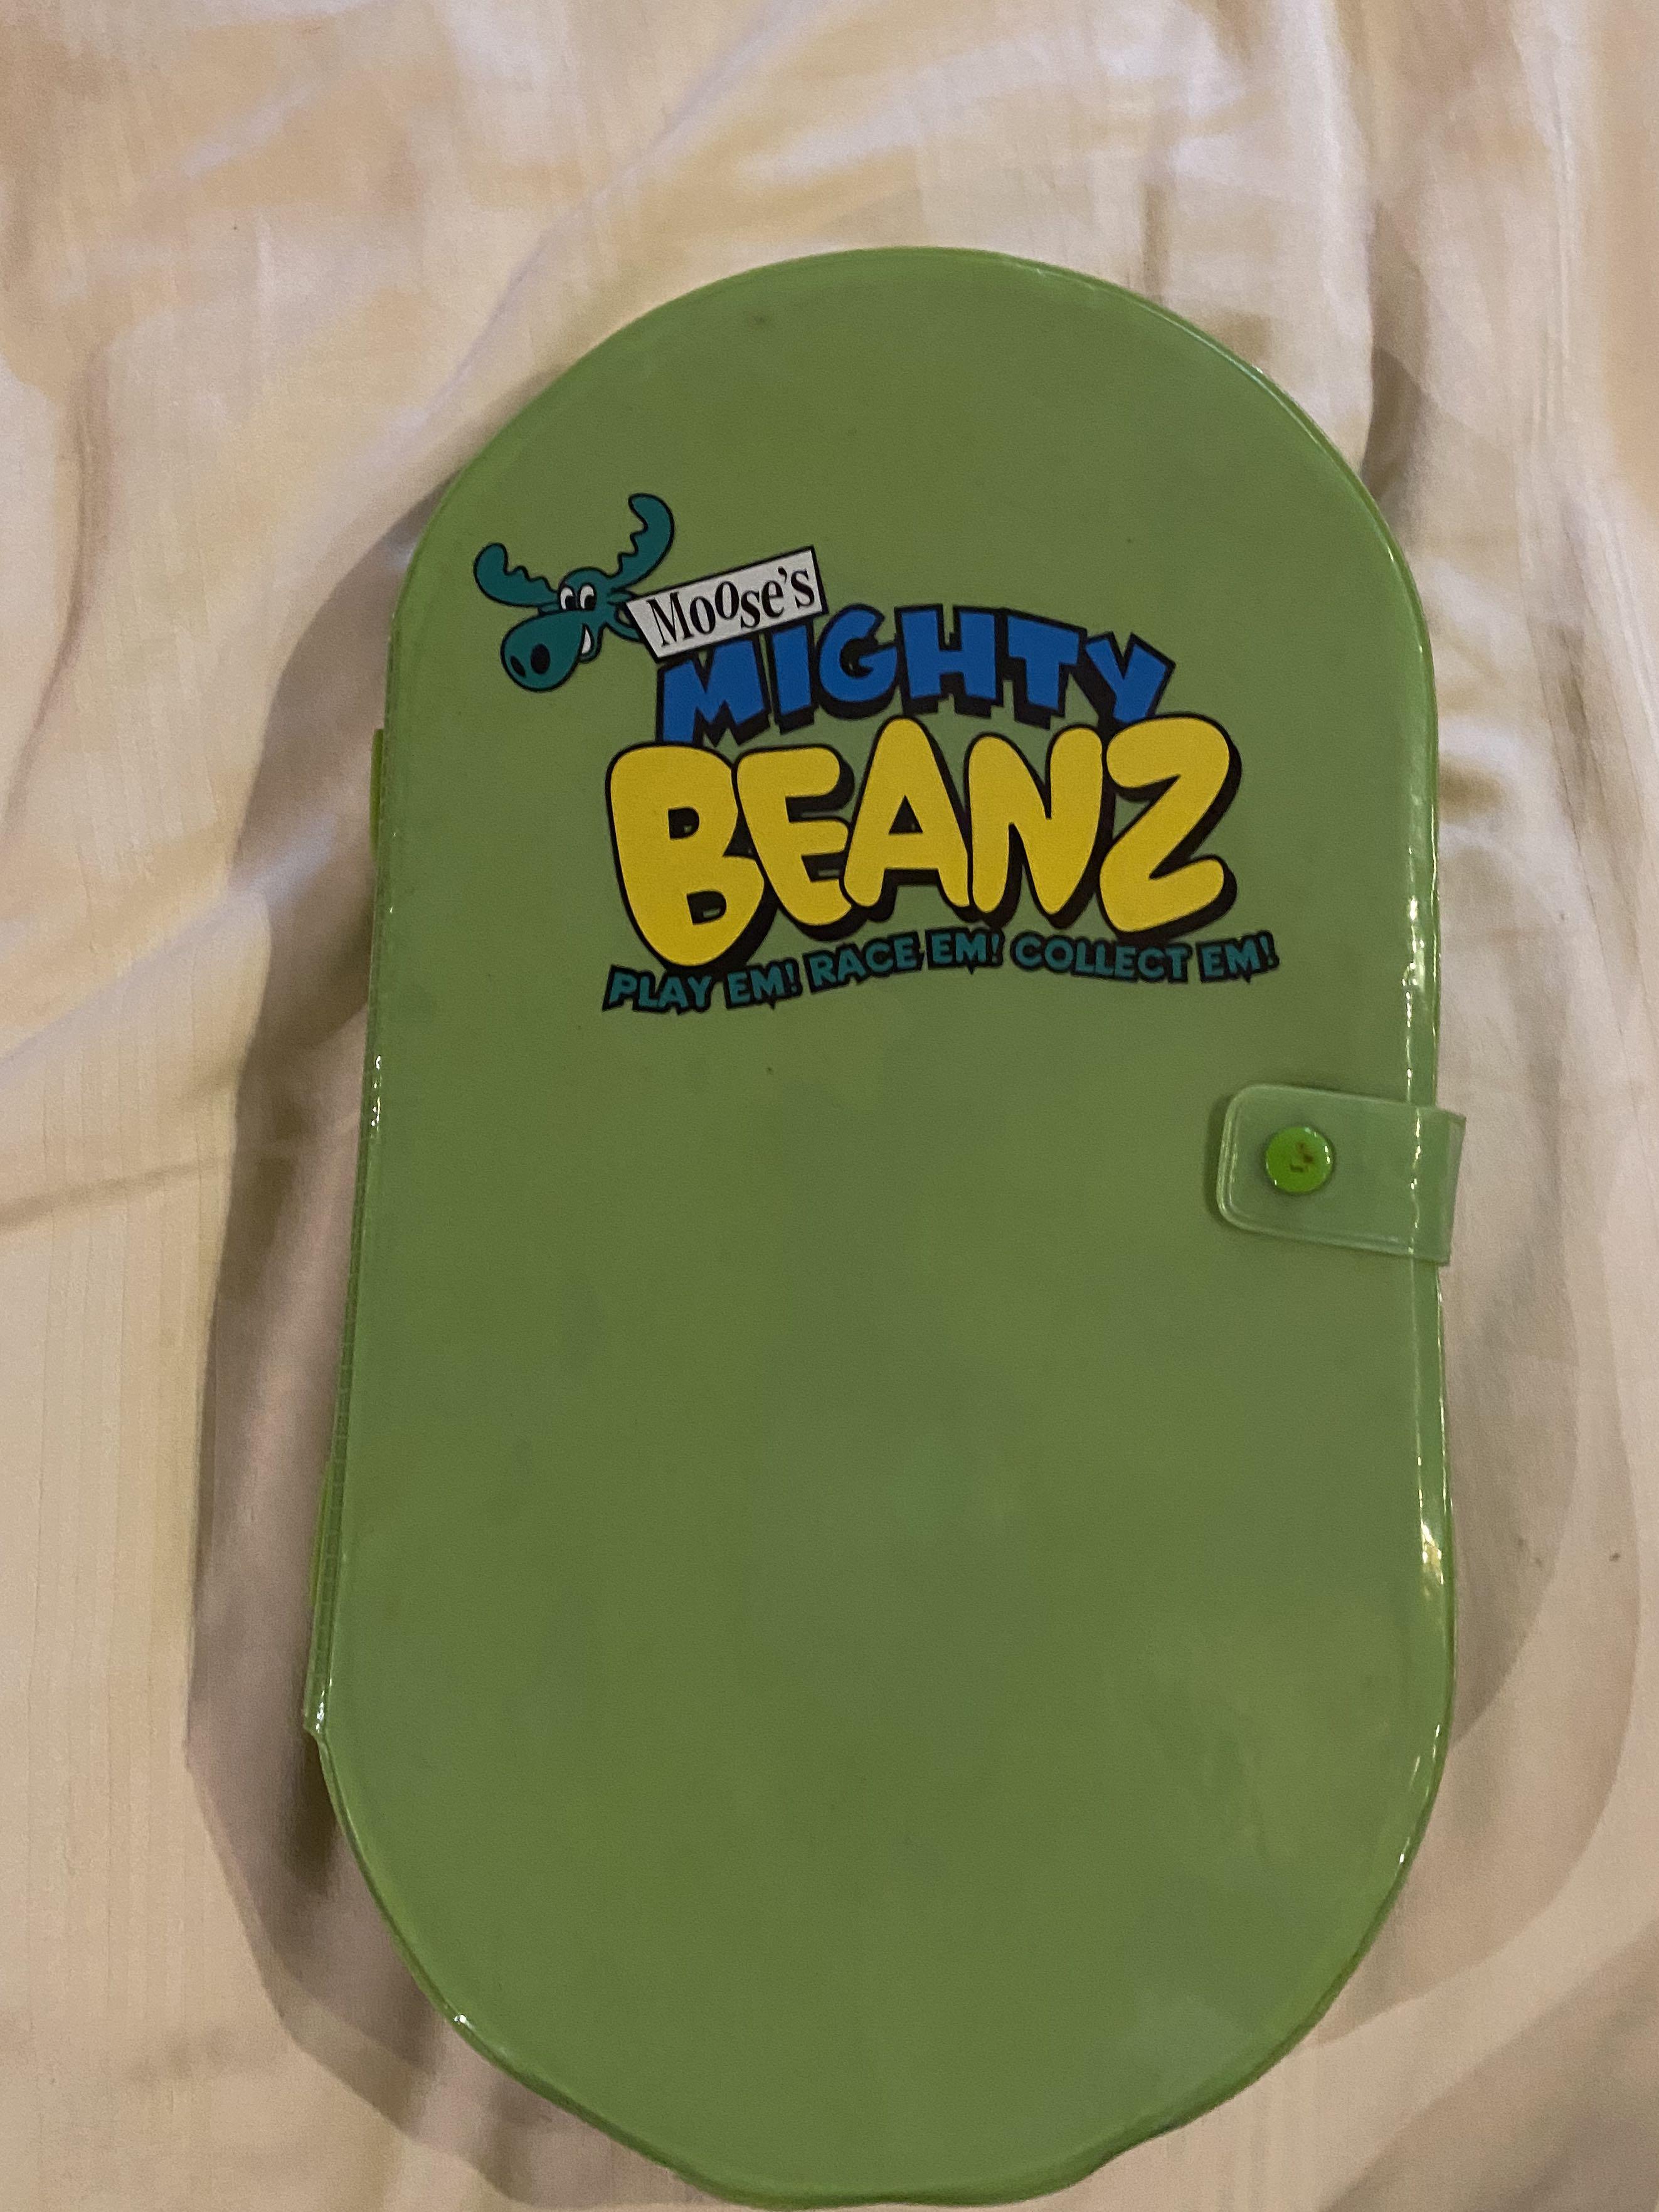 Mighty Beanz Beans Original Series 3 Collectors Case Empty Hobbies Toys Toys Games On Carousell